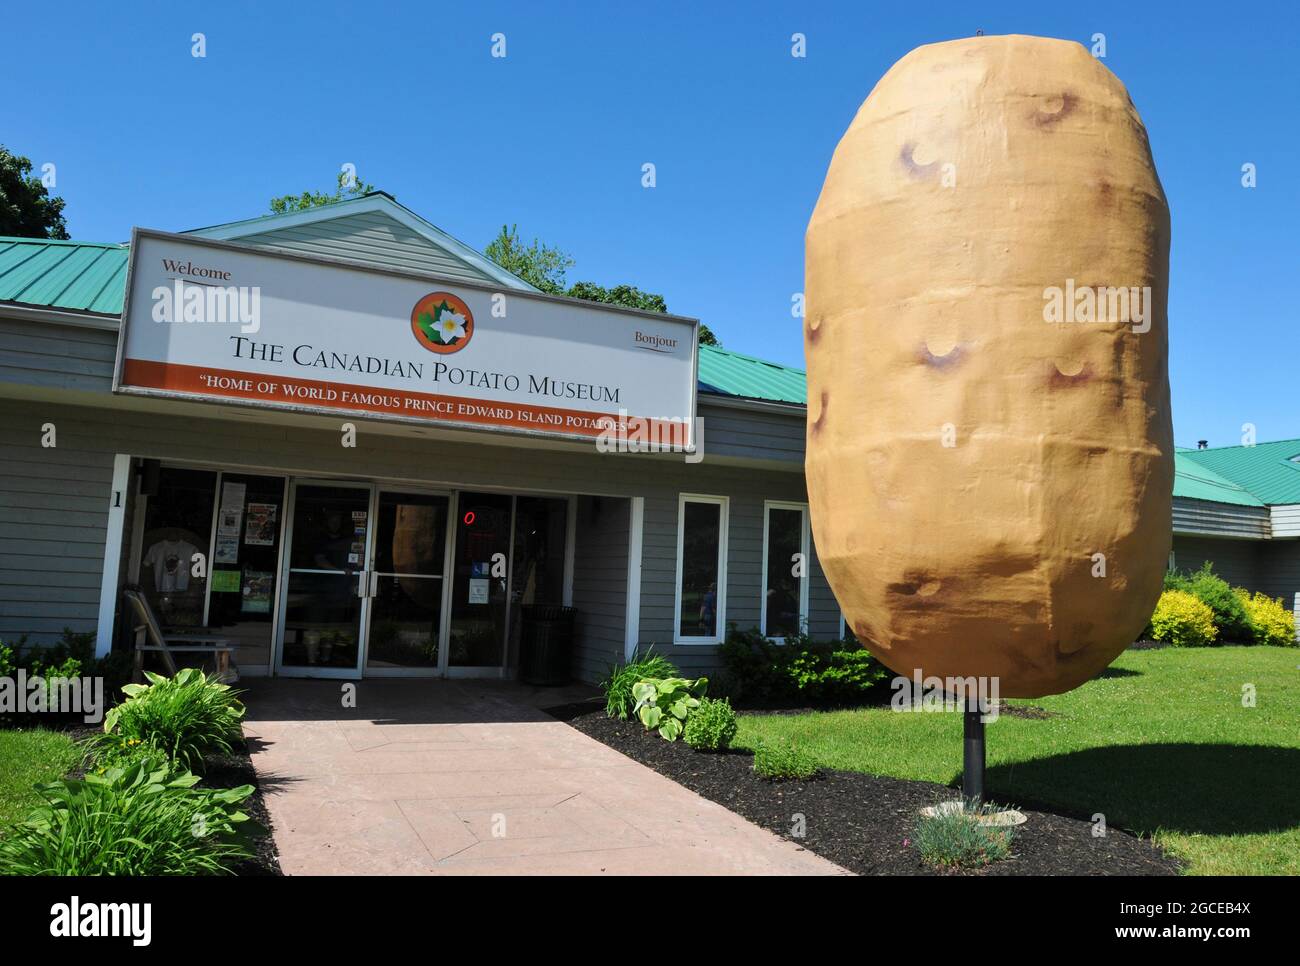 A giant fiberglass potato stands at the entrance to the Canadian Potato Museum, a tourist attraction in O'Leary, Prince Edward Island. Stock Photo